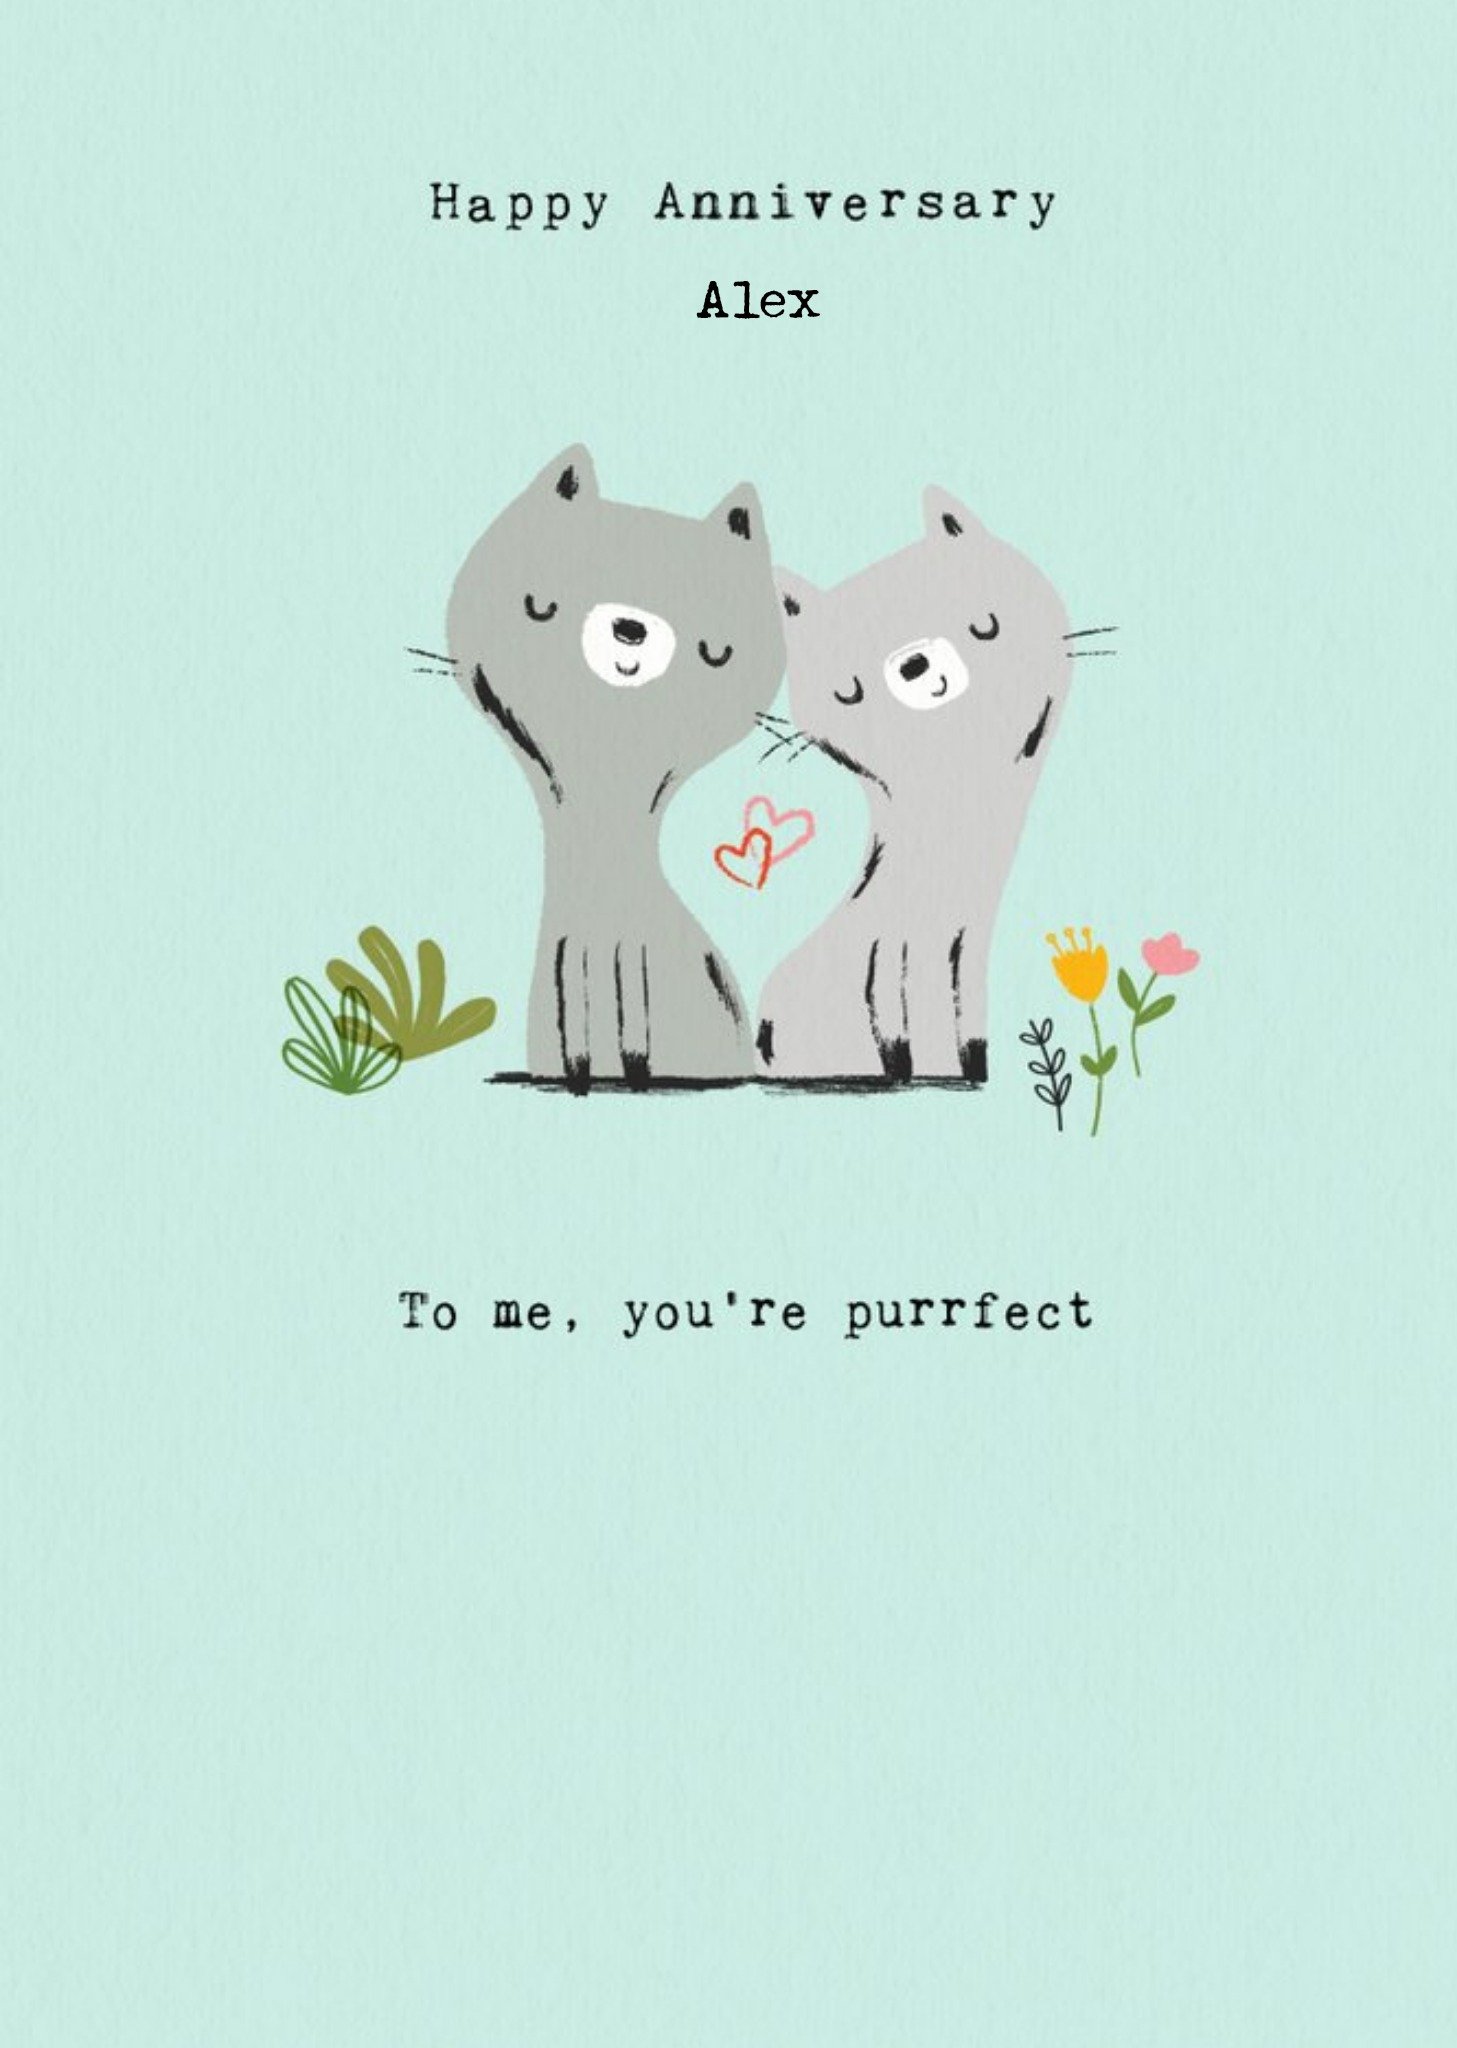 Moonpig Cute Illustration Of Two Cats With Two Lovehearts To Me, You're Purrfect Anniversary Card, L